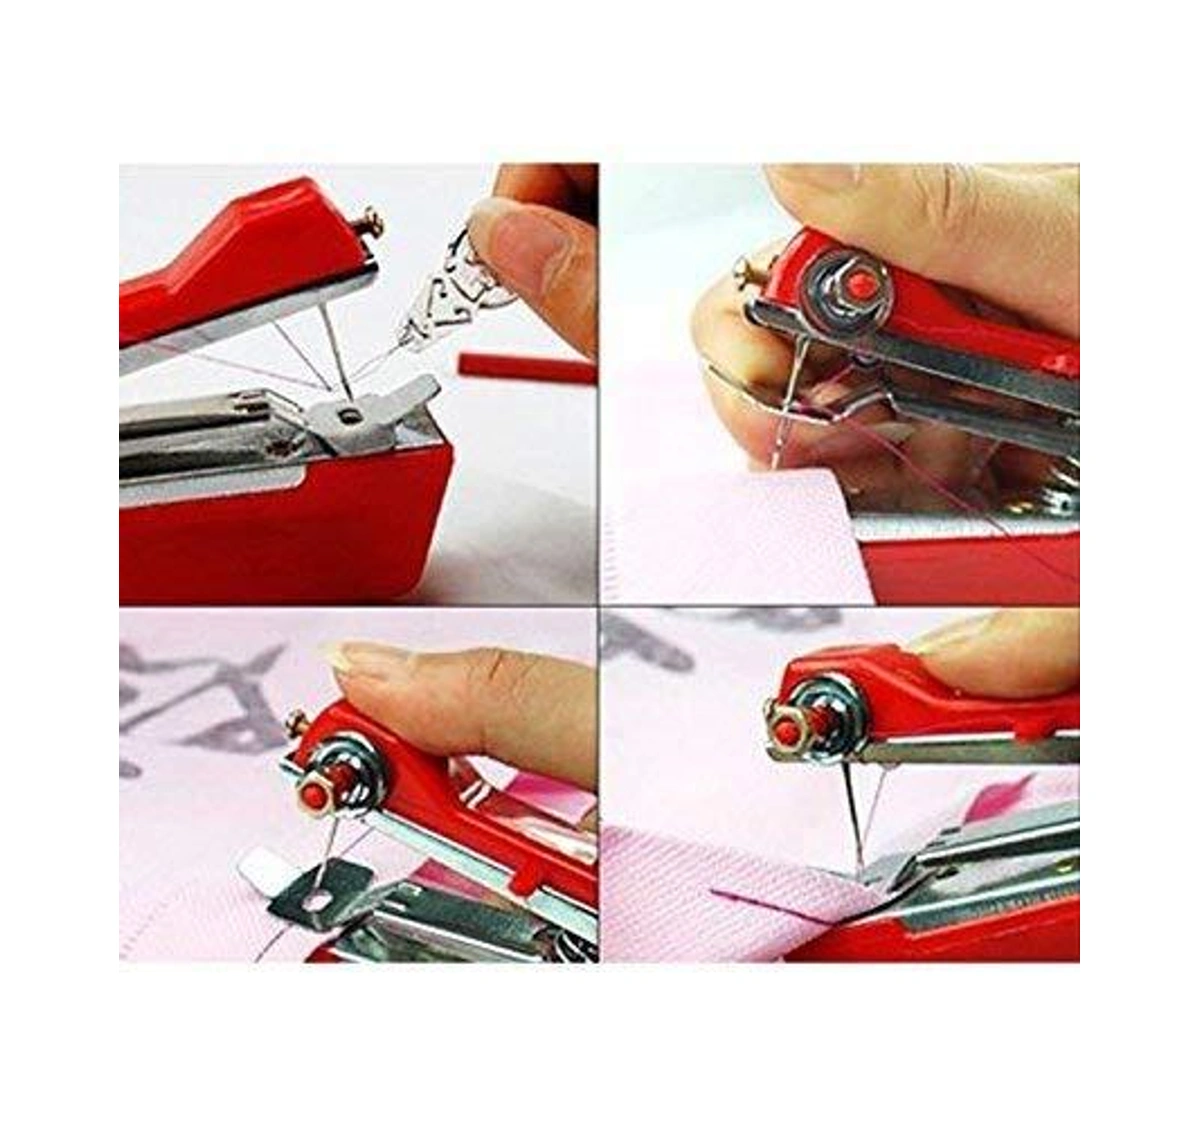 Buy Mini Sewing Machine Handheld Handy Stitch Machine,Craft Sewing  Machine,Mini Lightweight Stitch Handheld Cordless Portable,Portable Clothes  Fabric,Mini Sewing Machines Stapler G430 at Sehgall